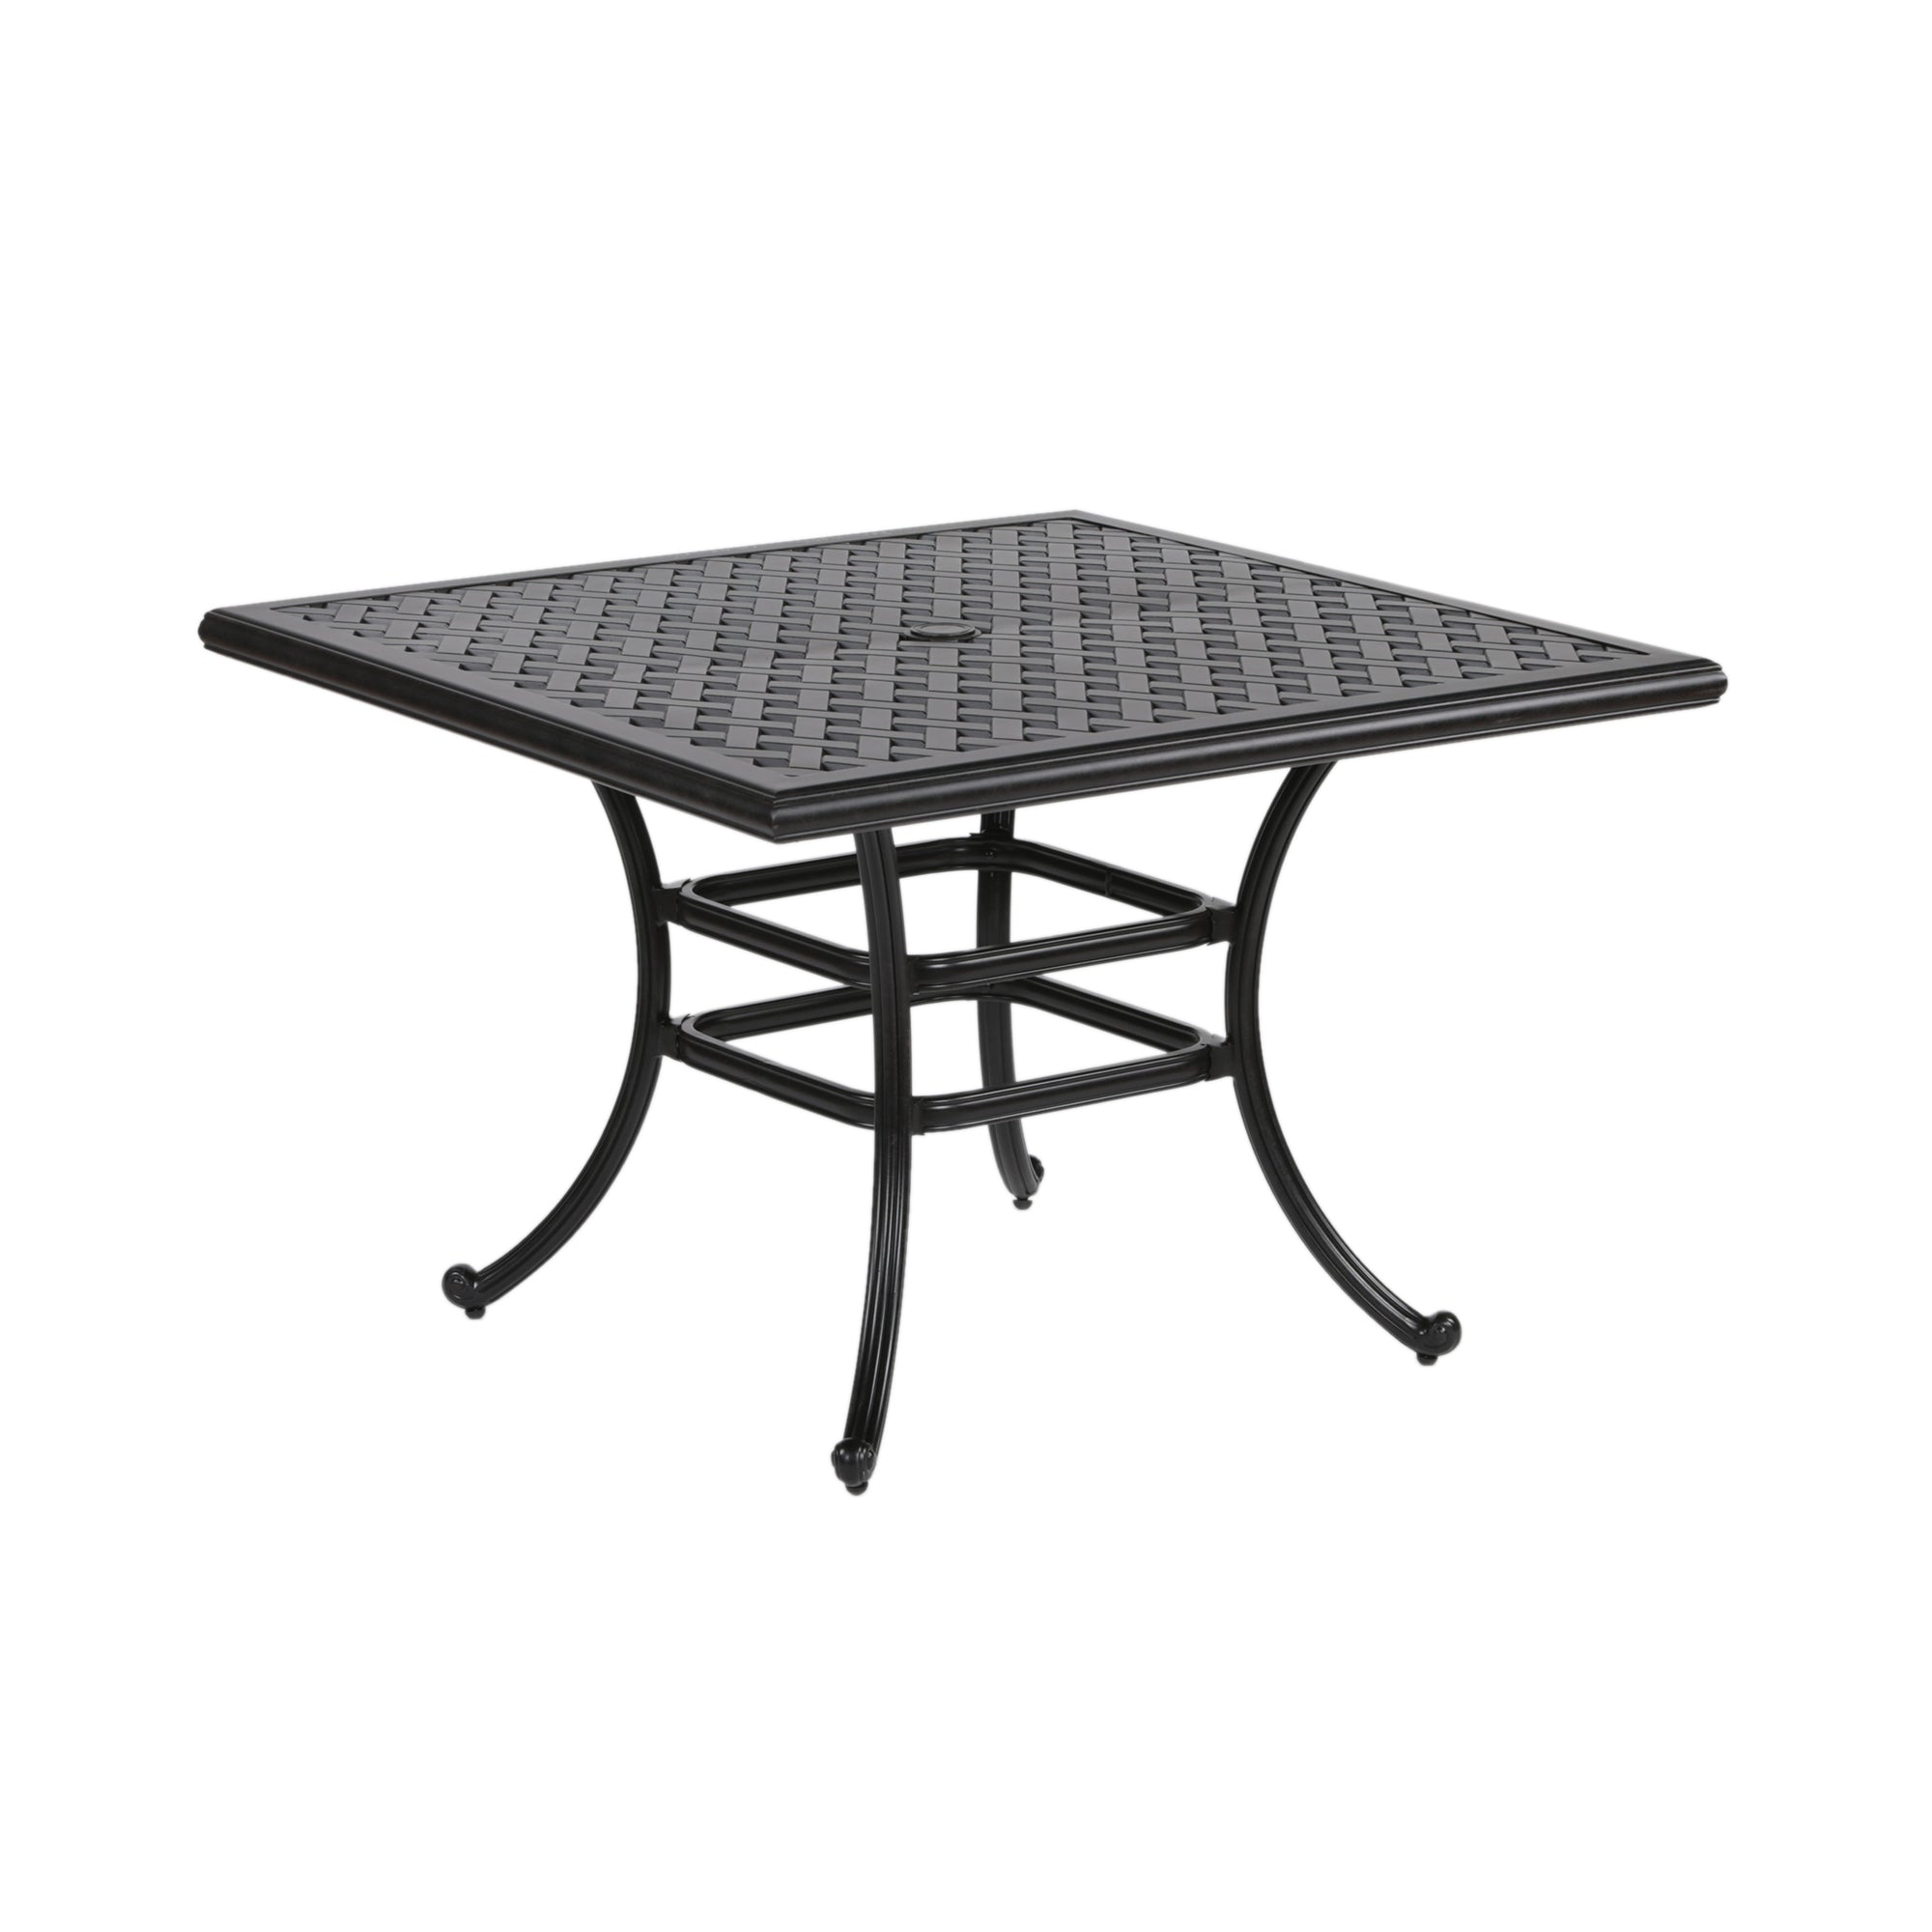 Square 4 Person 43.19" Long Aluminum Dining Set with antique brown-polyester-aluminum